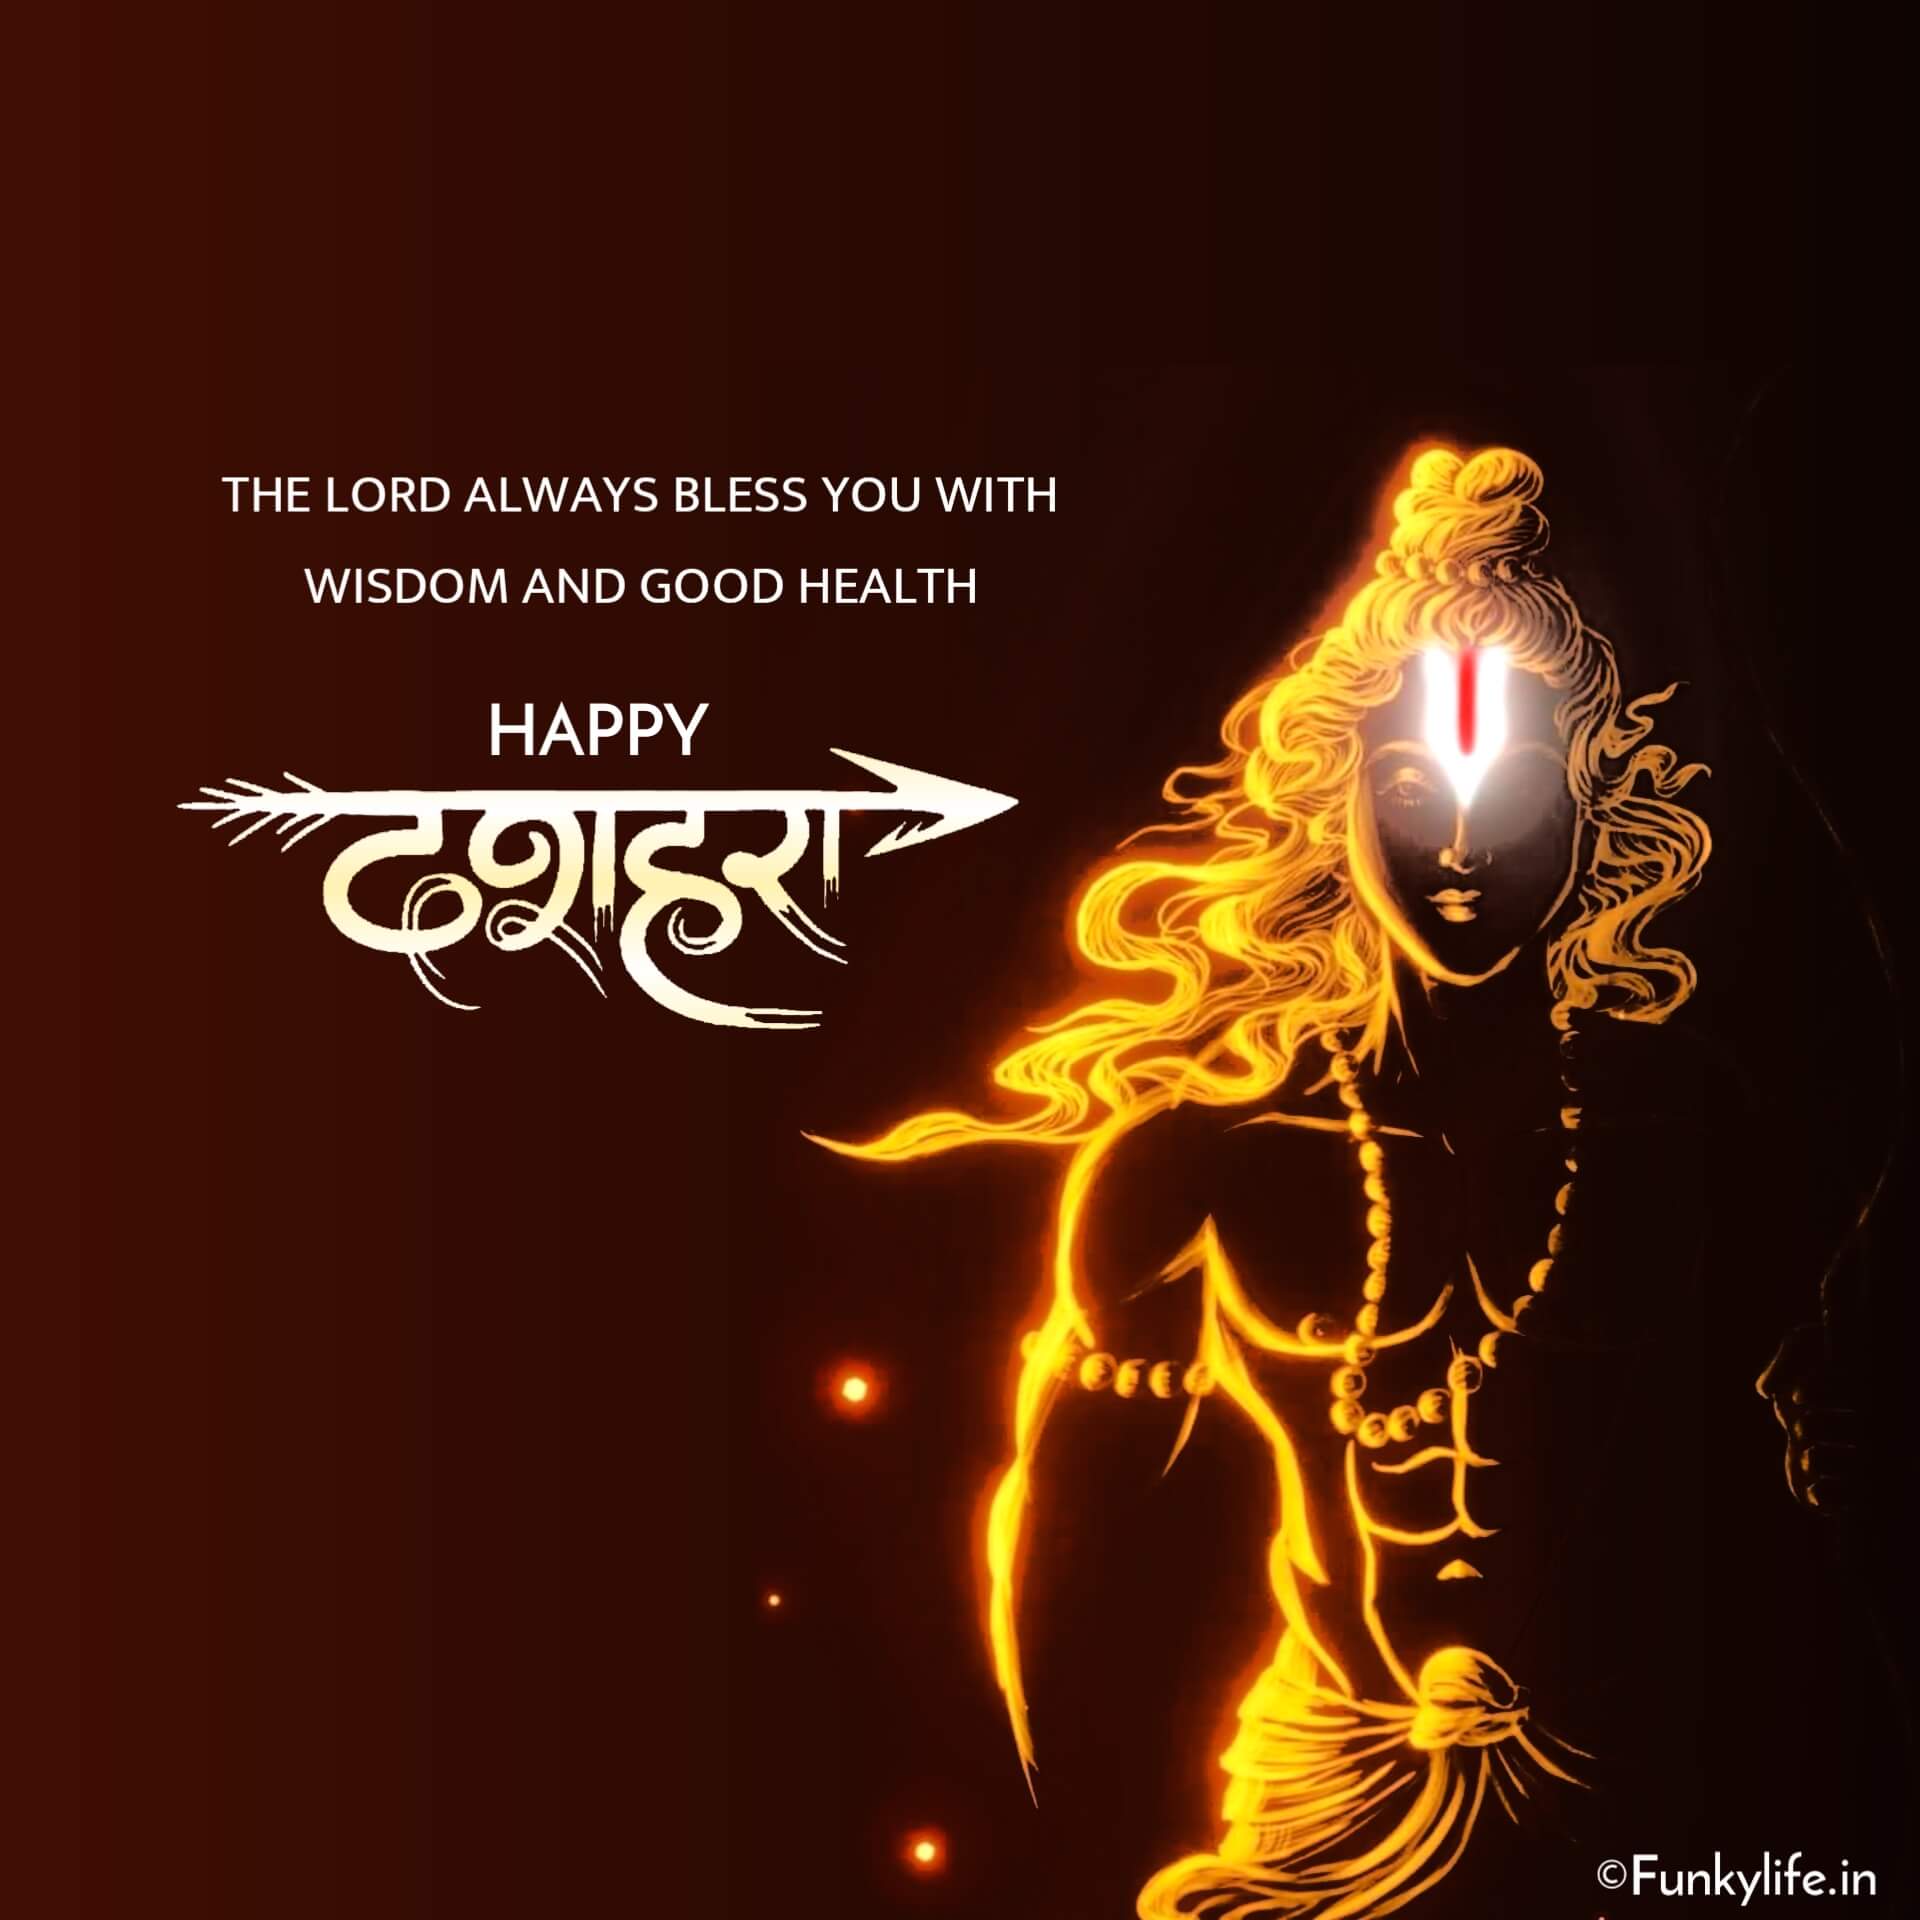 50 Best Happy Dussehra Images, Photos and Pictures 2022